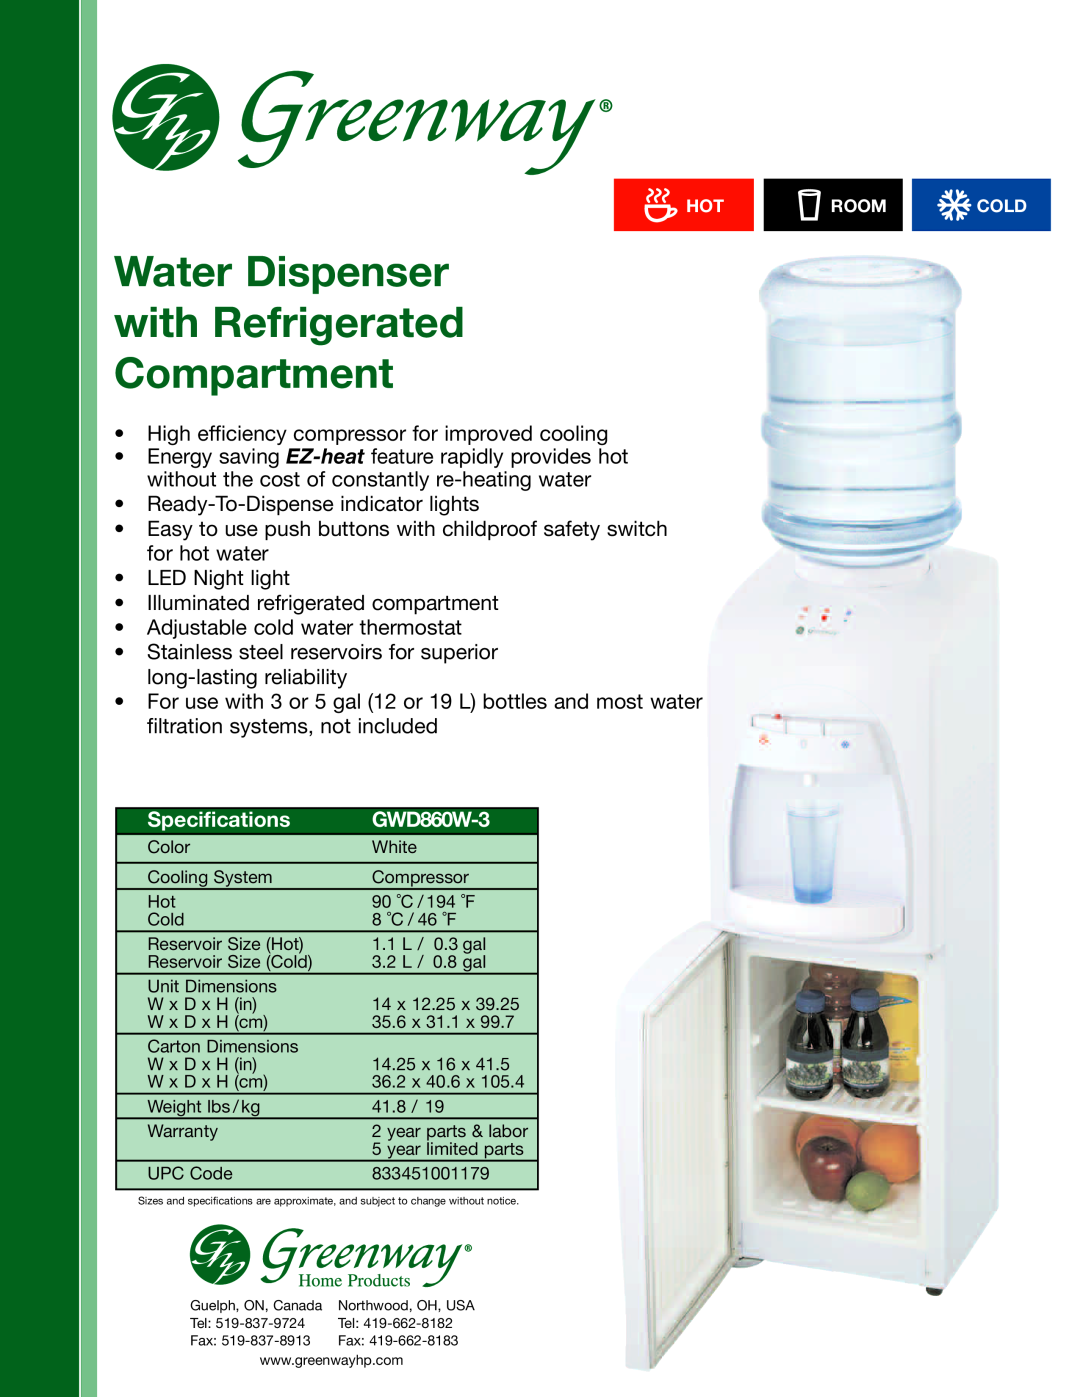 Greenway Home Products GWD860W-3 specifications Water Dispenser with Refrigerated Compartment, Specifications 